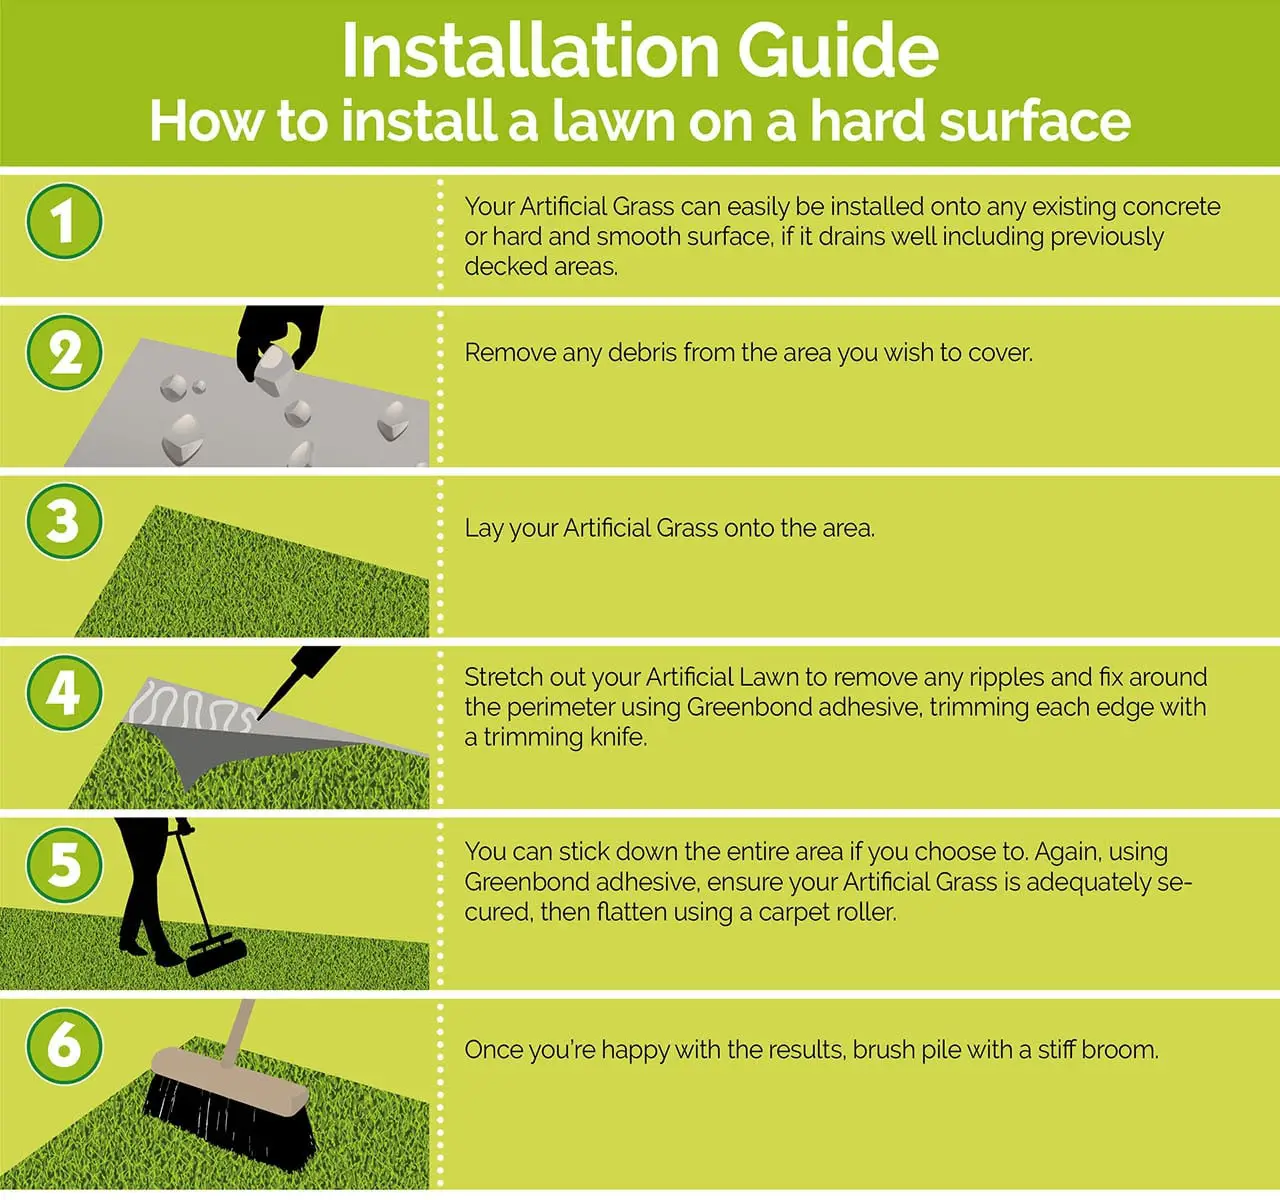 How to install Artificial Grass on a hard surface